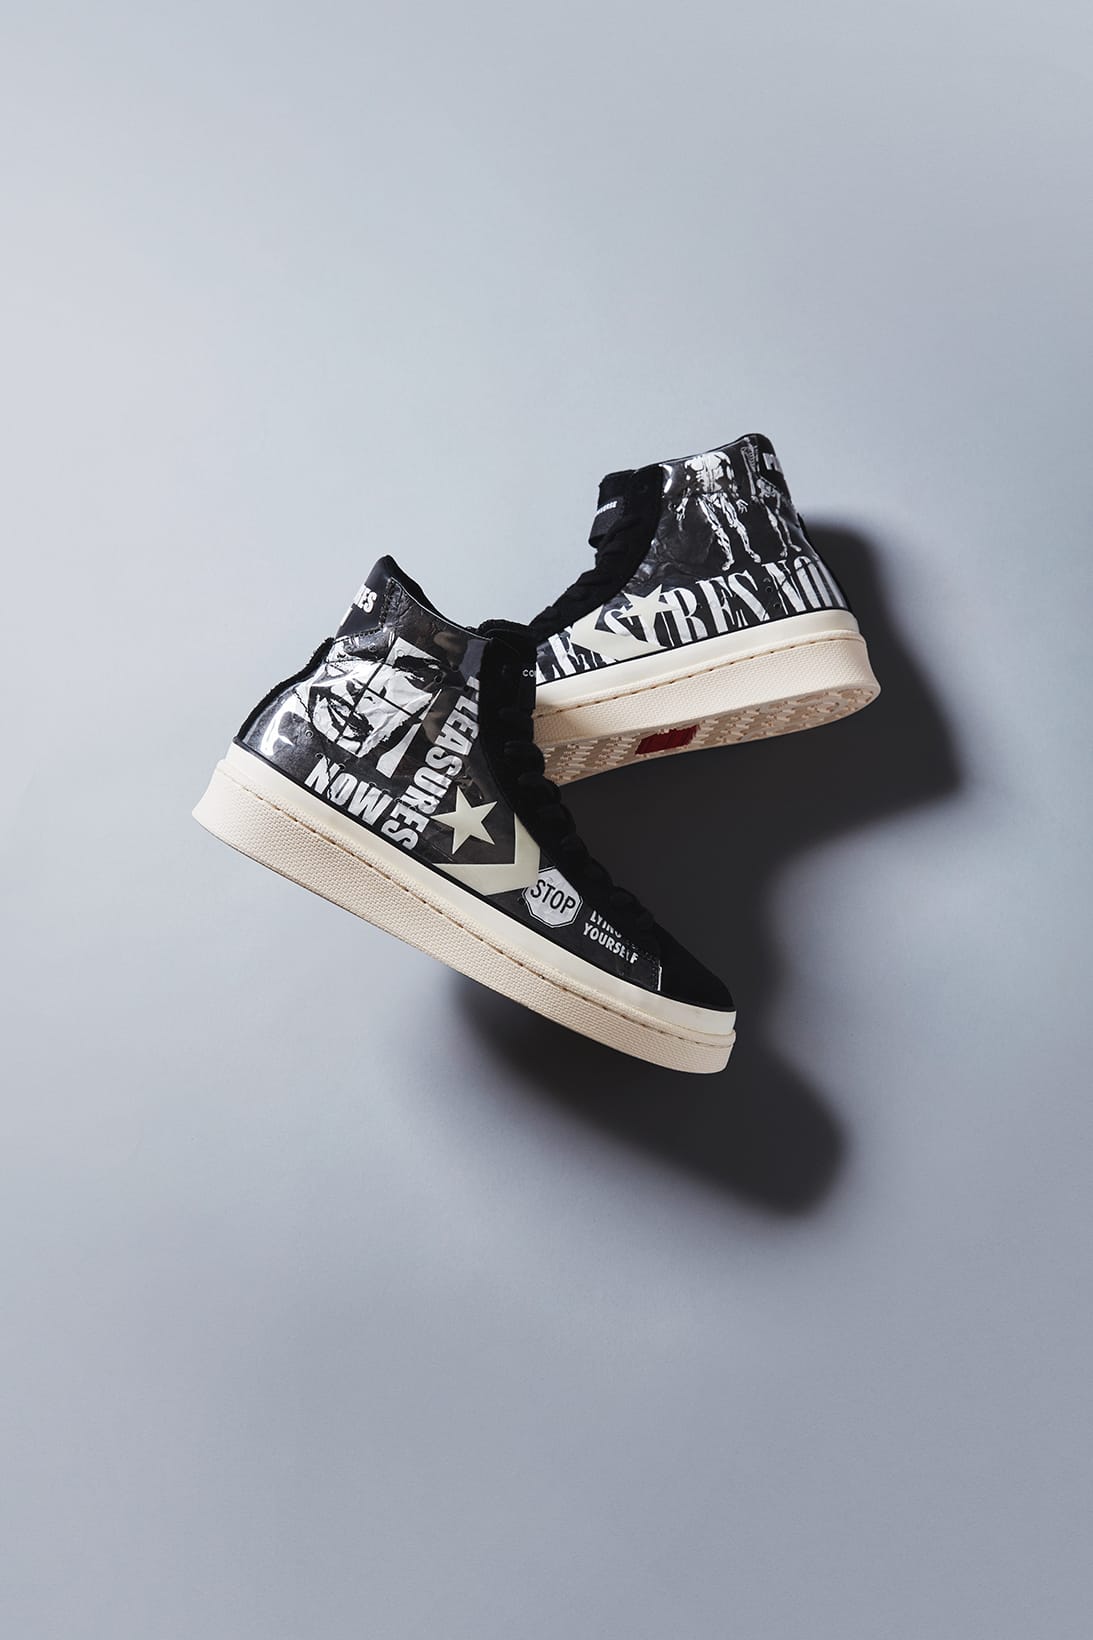 https%3A%2F%2Fhypebeast.com%2Fwp content%2Fblogs.dir%2F6%2Ffiles%2F2019%2F11%2Fconverse pleasures collaboration pro leather sneakers punk black white release date 1